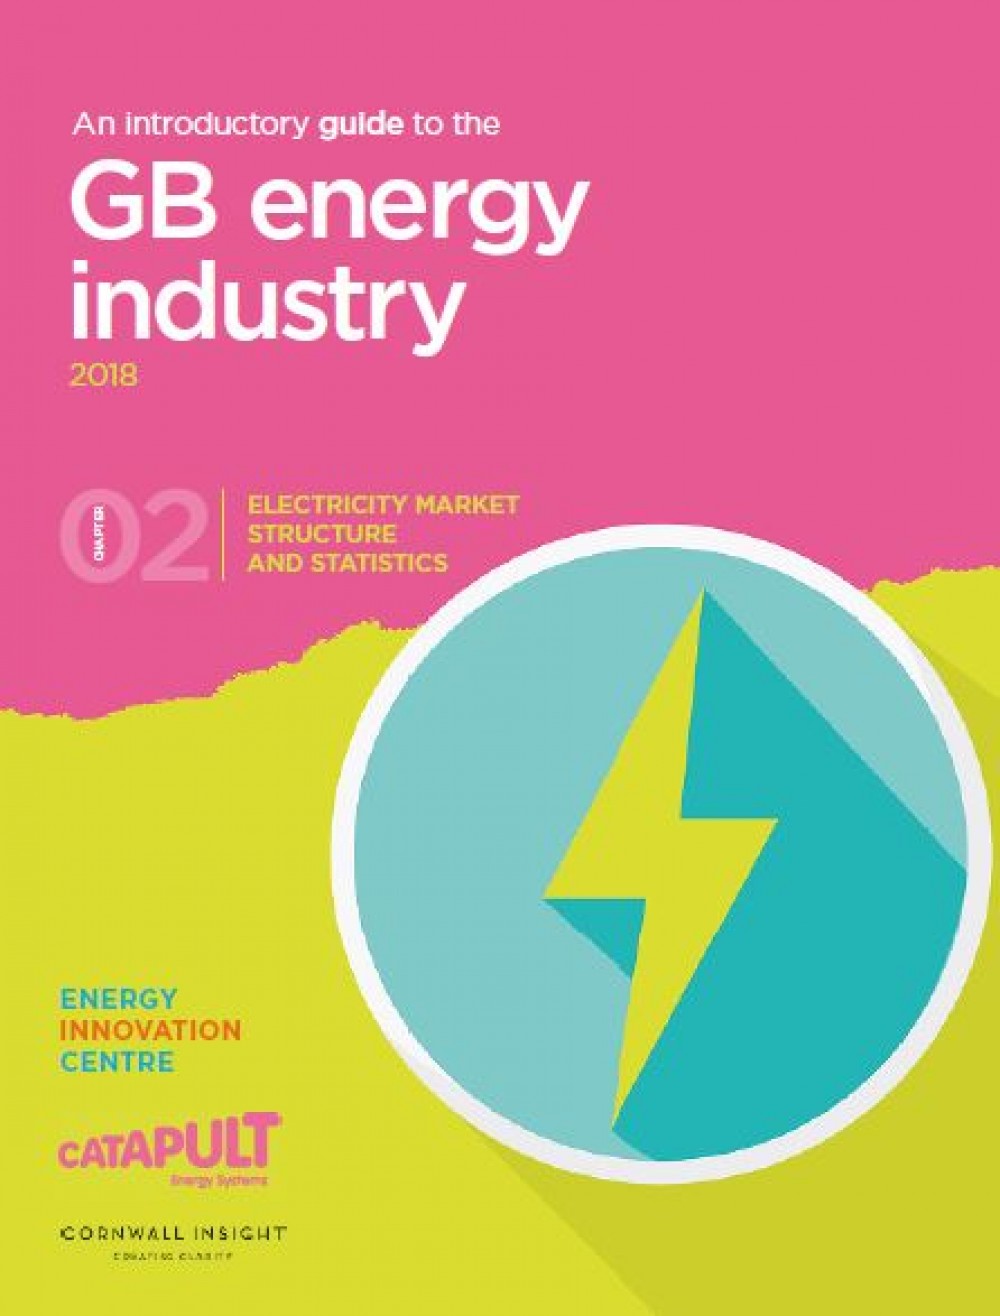 An introductory guide to the GB energy industry: Electricity market structure and statistics